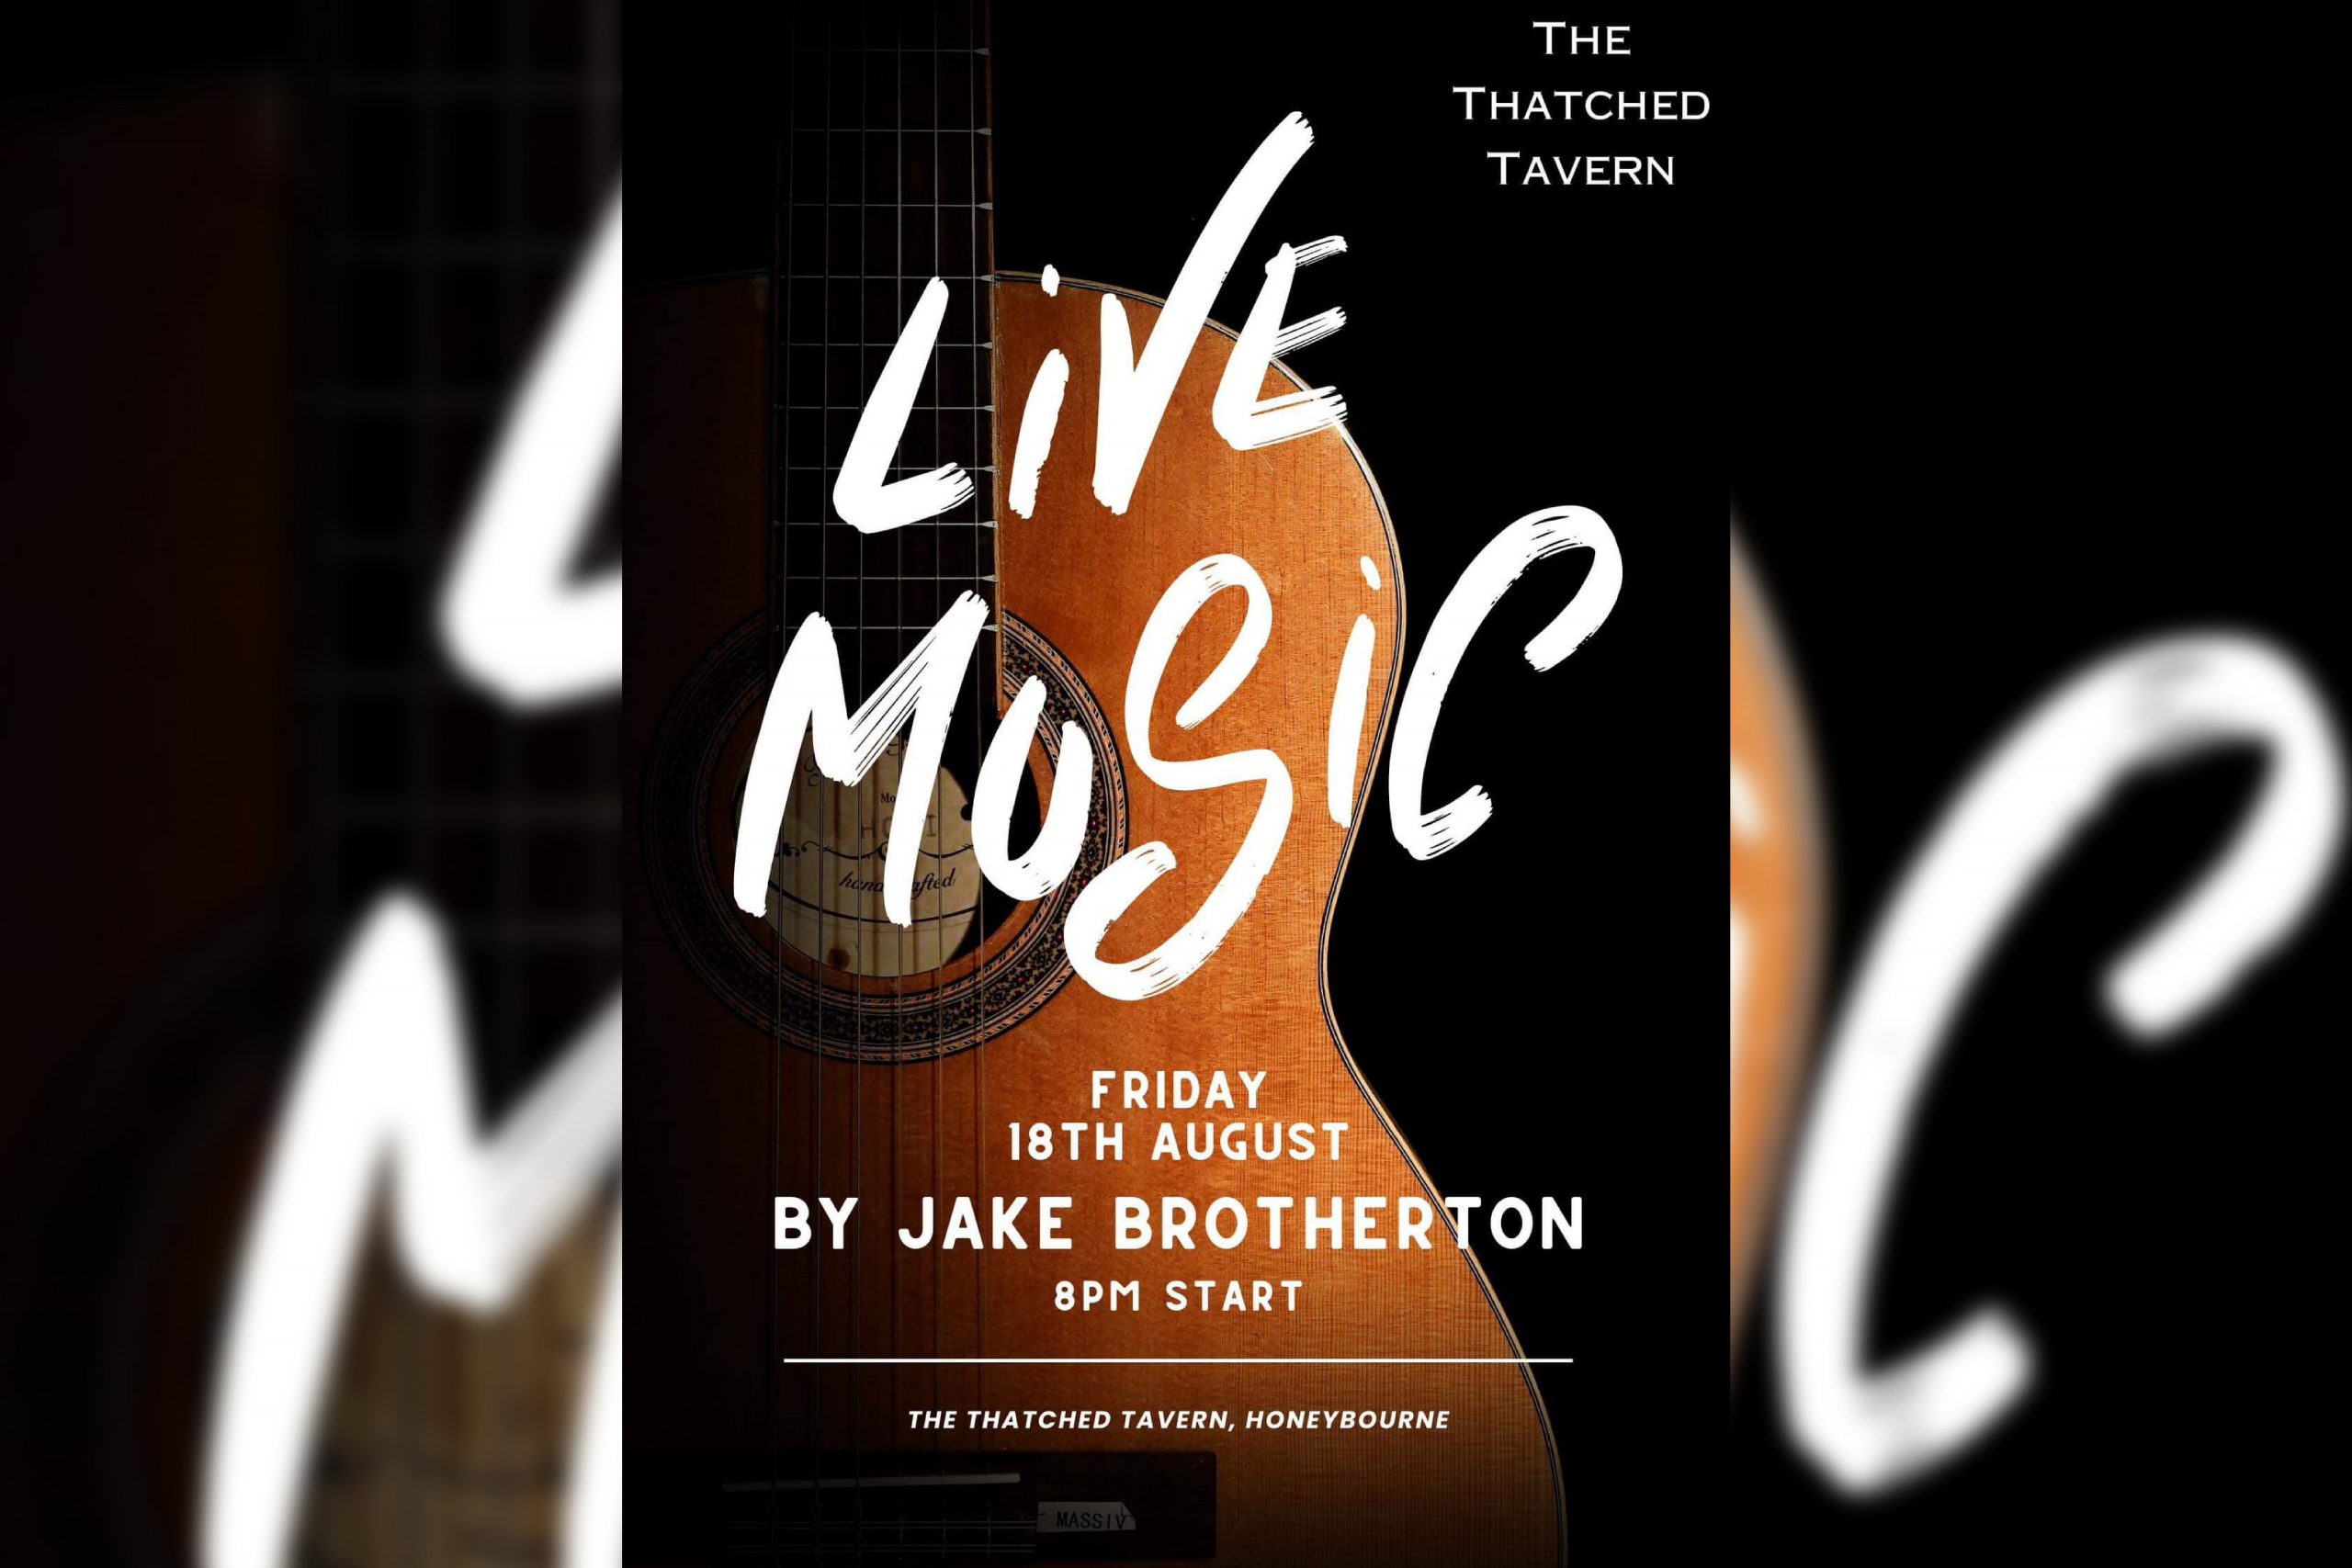 Live Music by Jake Brotherton at The Thatched Tavern Honeybourne – Friday 18th August from 8pm